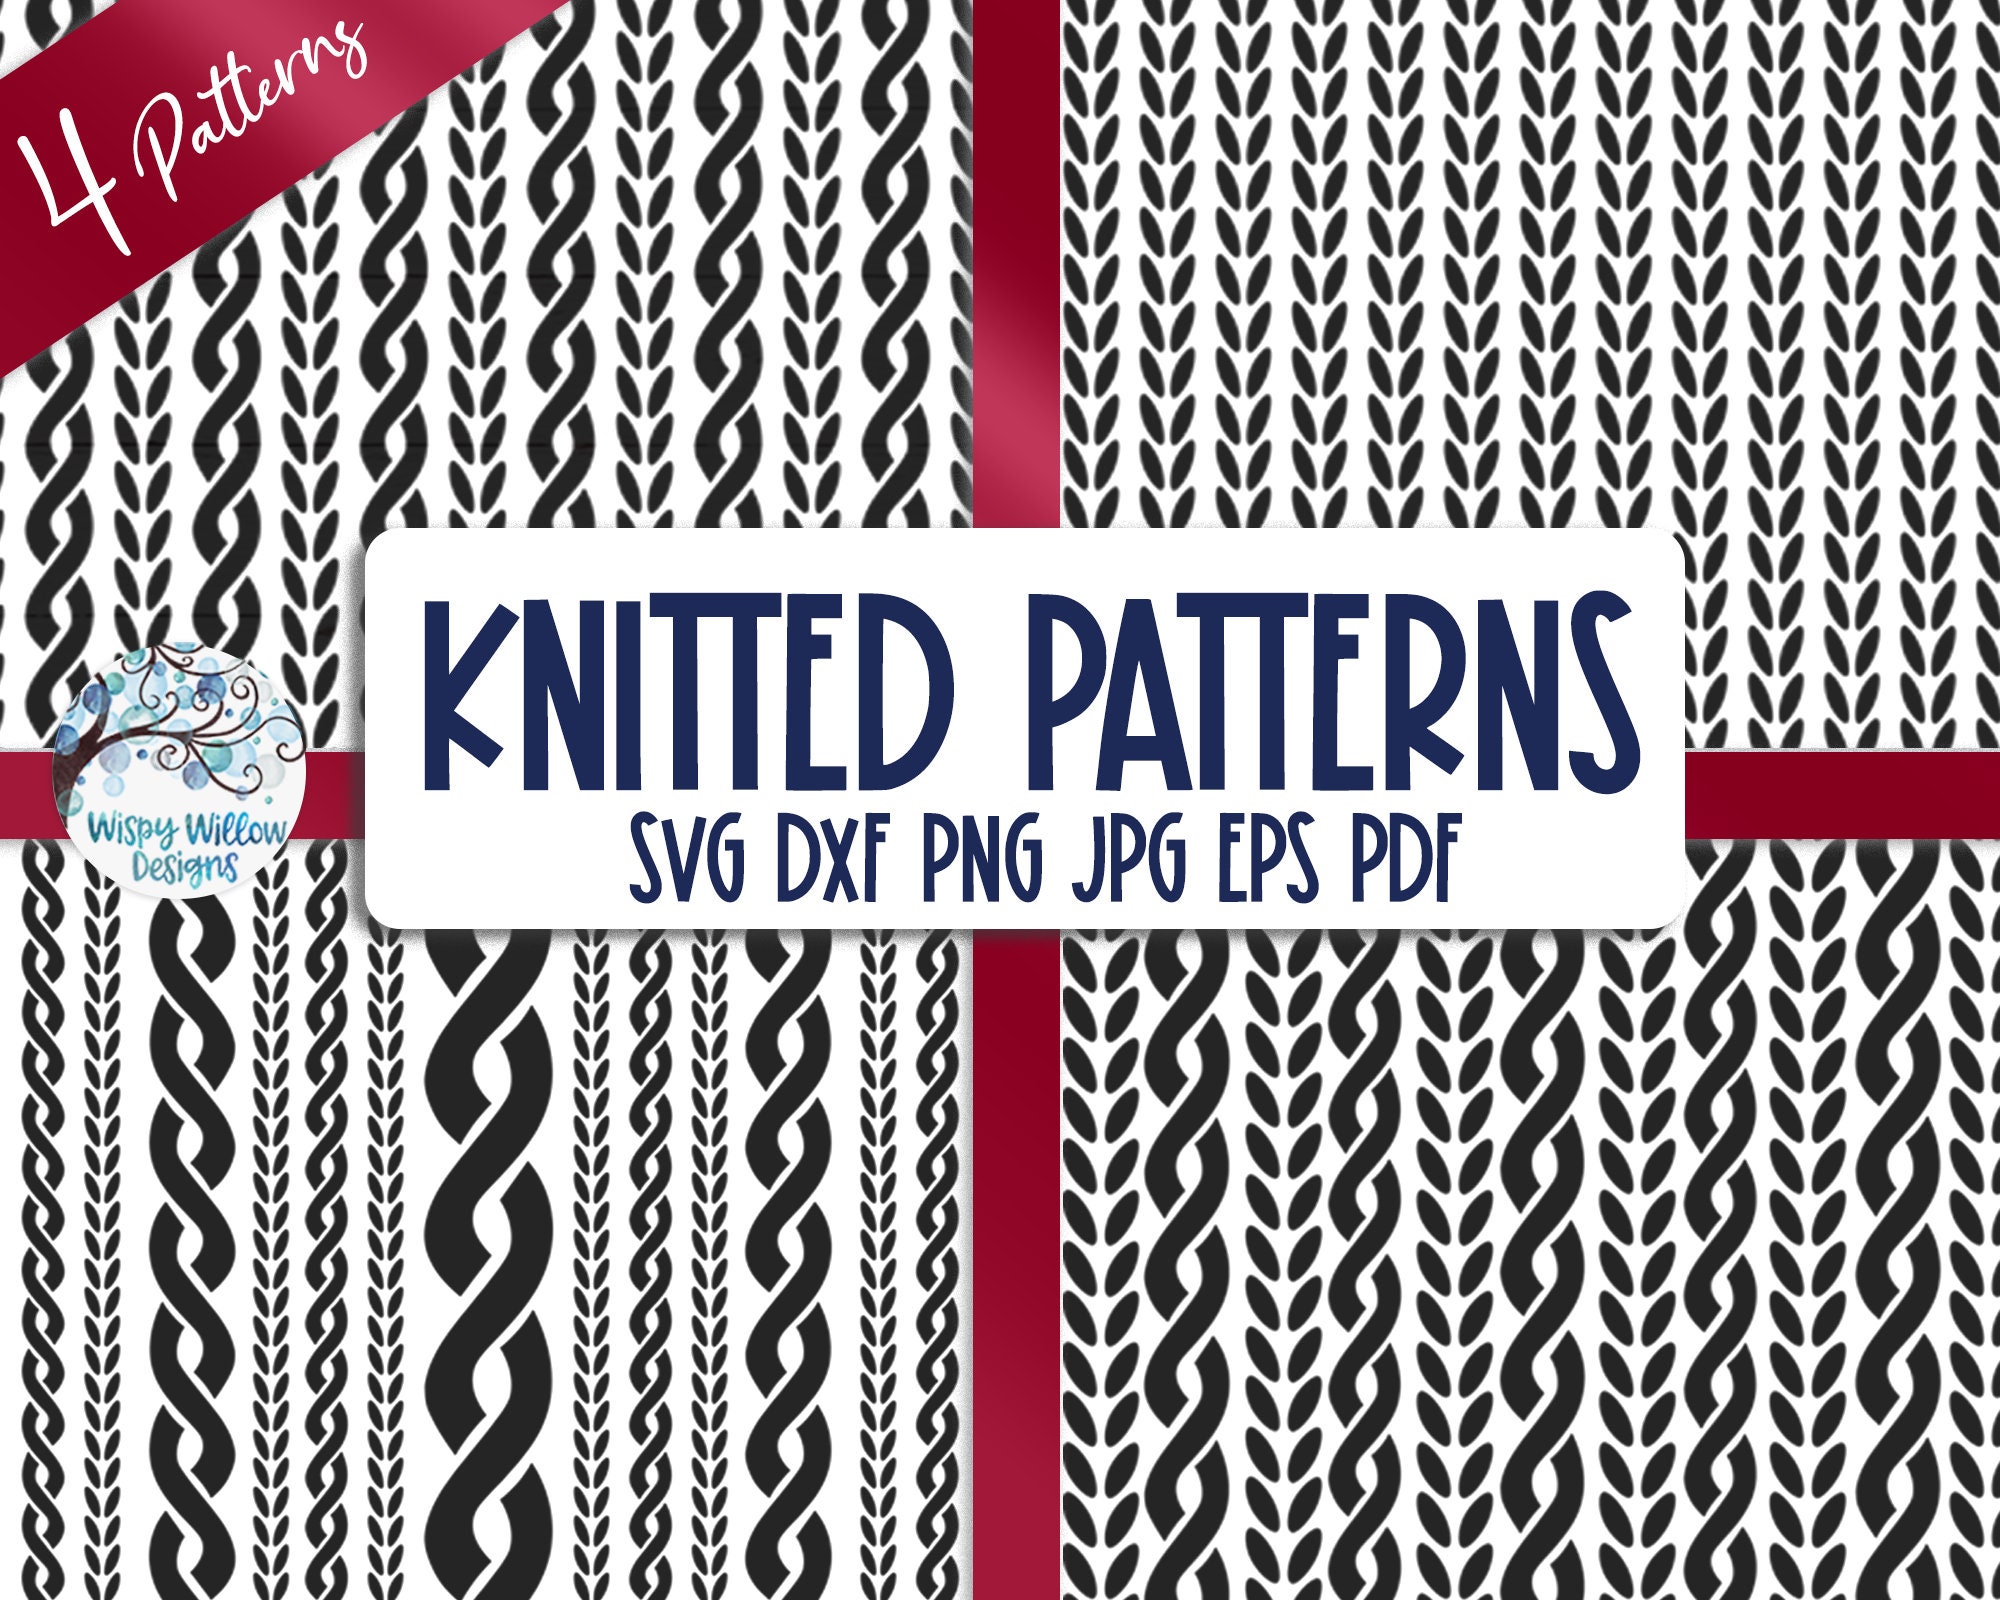 Knitted Pattern SVG Bundle, Knitting Yarn Texture PNG, Cable Stitch Knit  Design, Vinyl Decal File for Cricut and Silhouette -  Canada